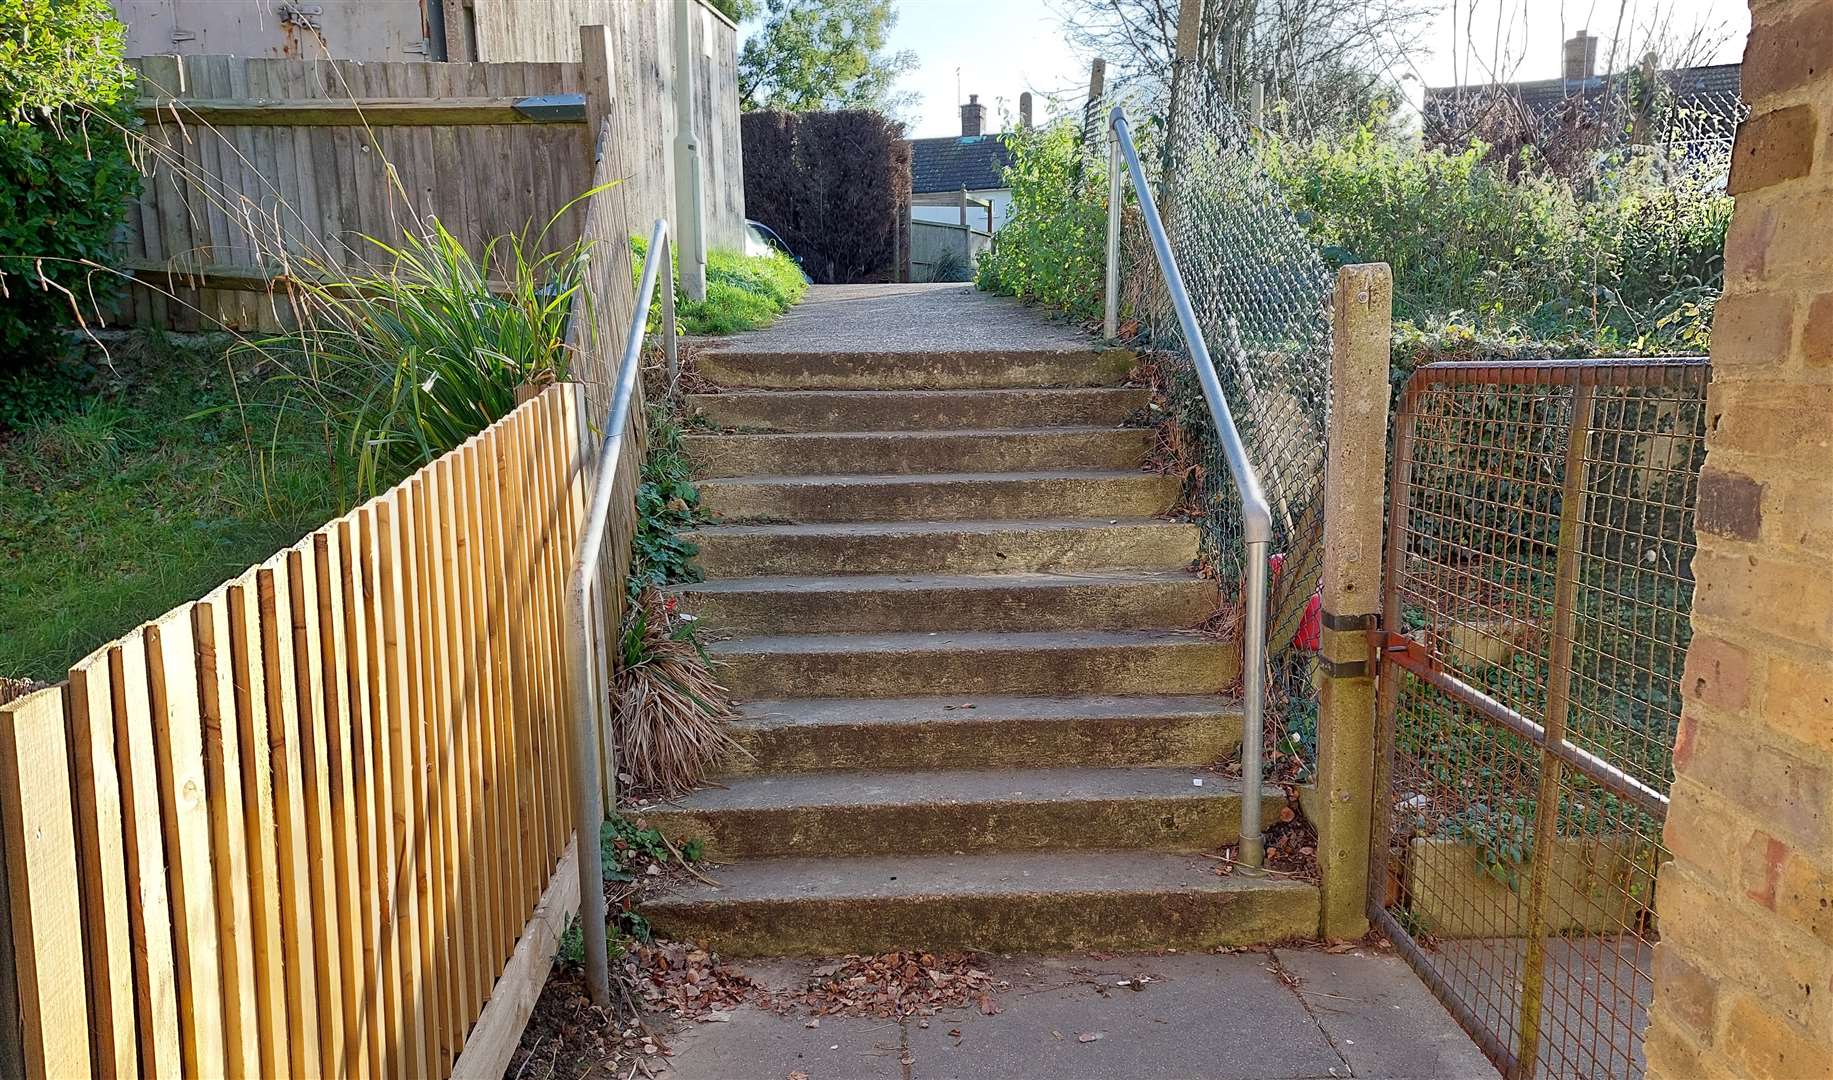 The steps from the car park don't allow disability access